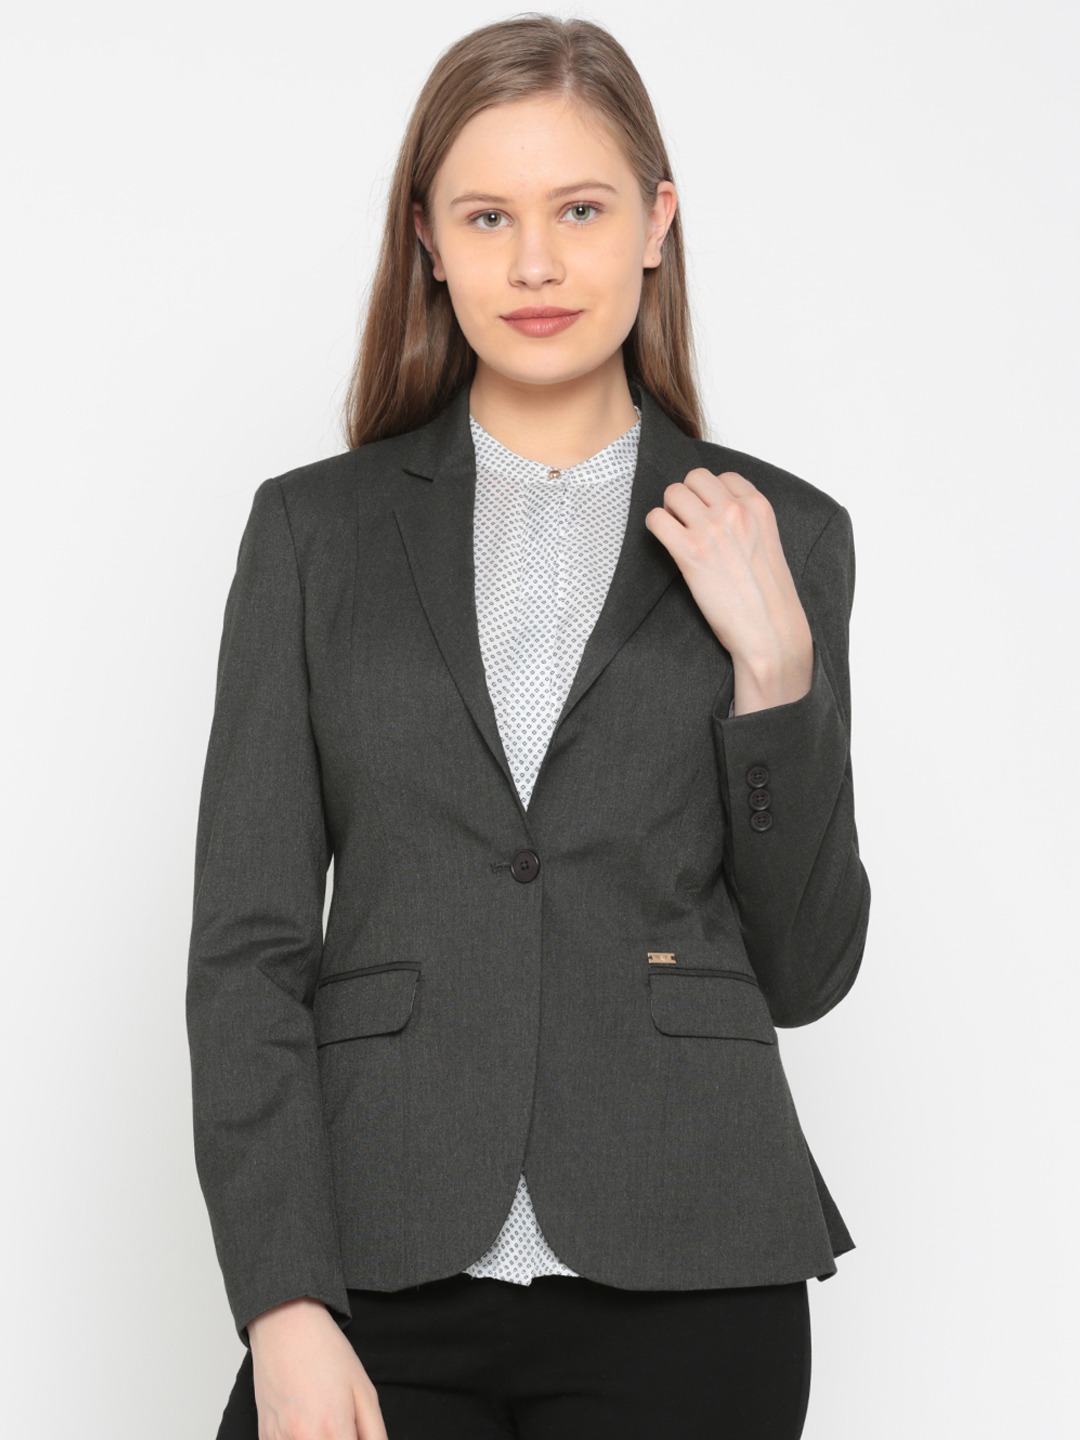 Clothing Blazers | Park Avenue Charcoal Grey Single-Breasted Formal Blazer - UO93159